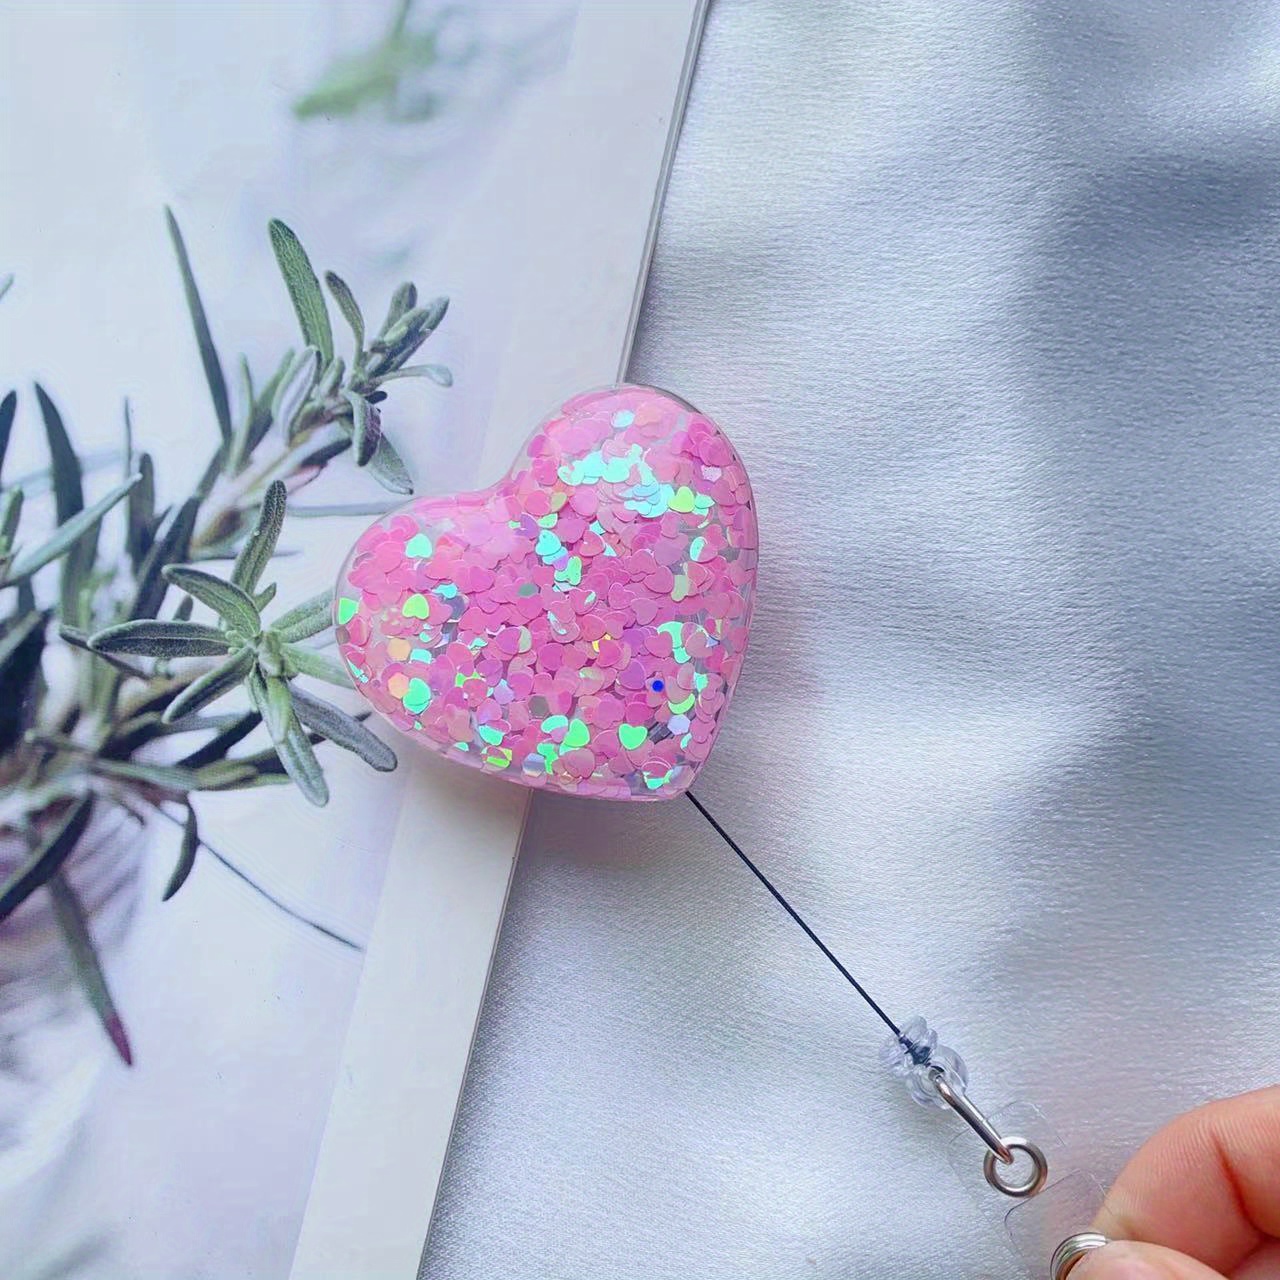 1pc Glitter Heart Resin Sequins Nurse Badge Reel ID Badge Holder Retractable Valentines Day Gfit For Doctor Nurse Charm Gift For Her